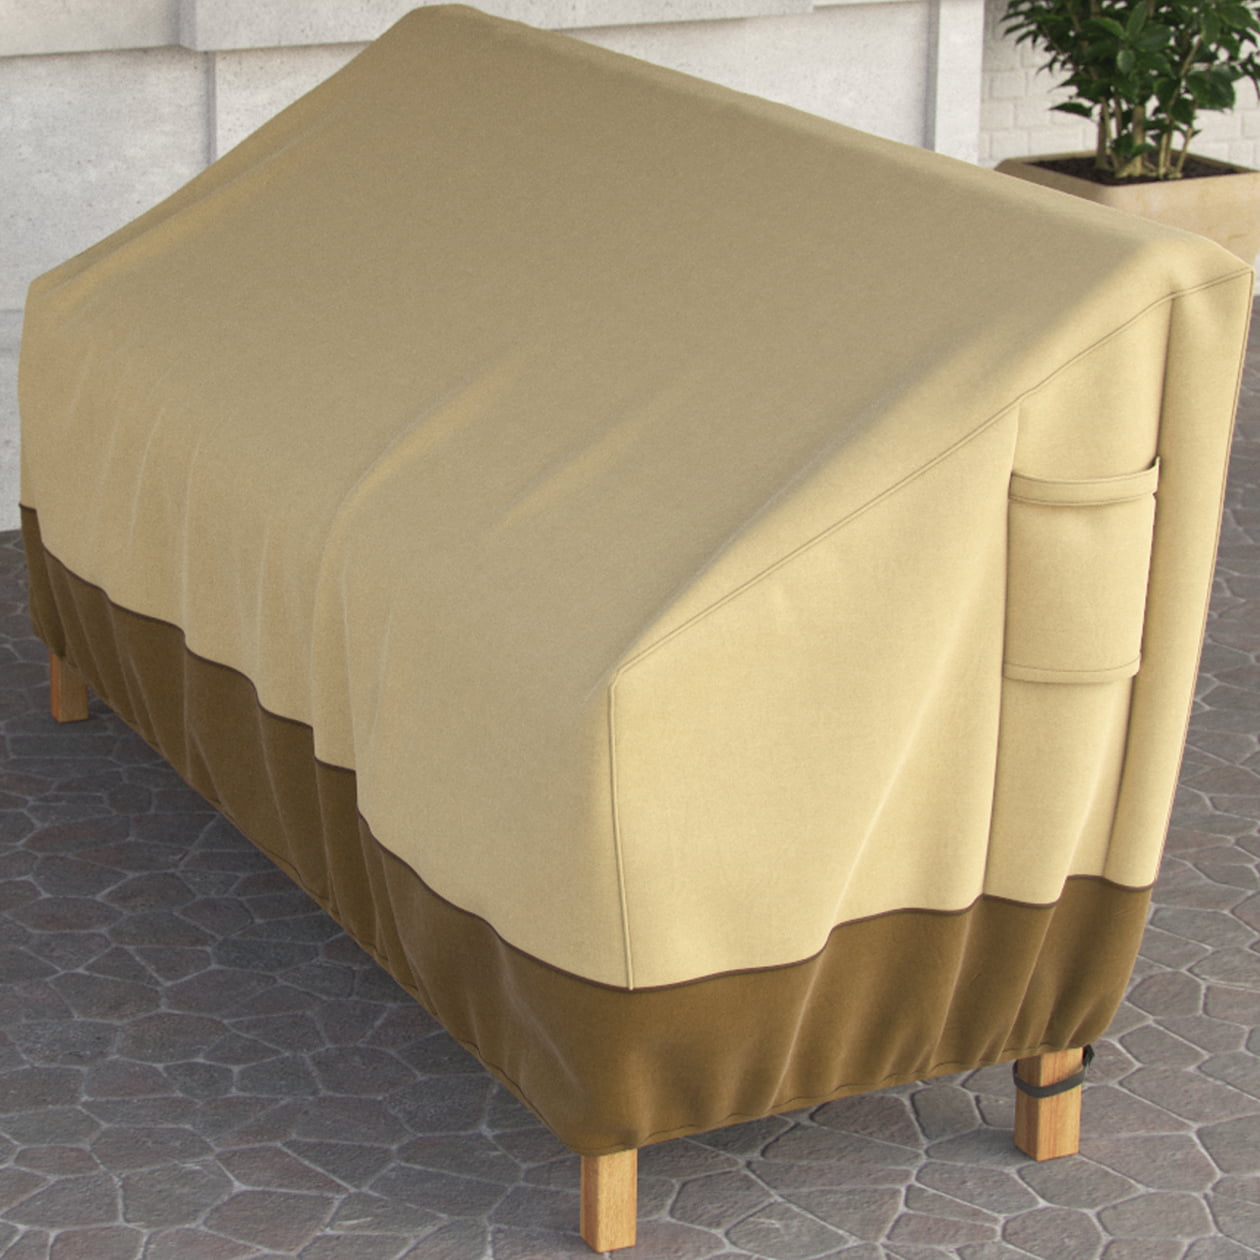 Water Resistant Firepit Cover, Large Round Fire Pit Cover